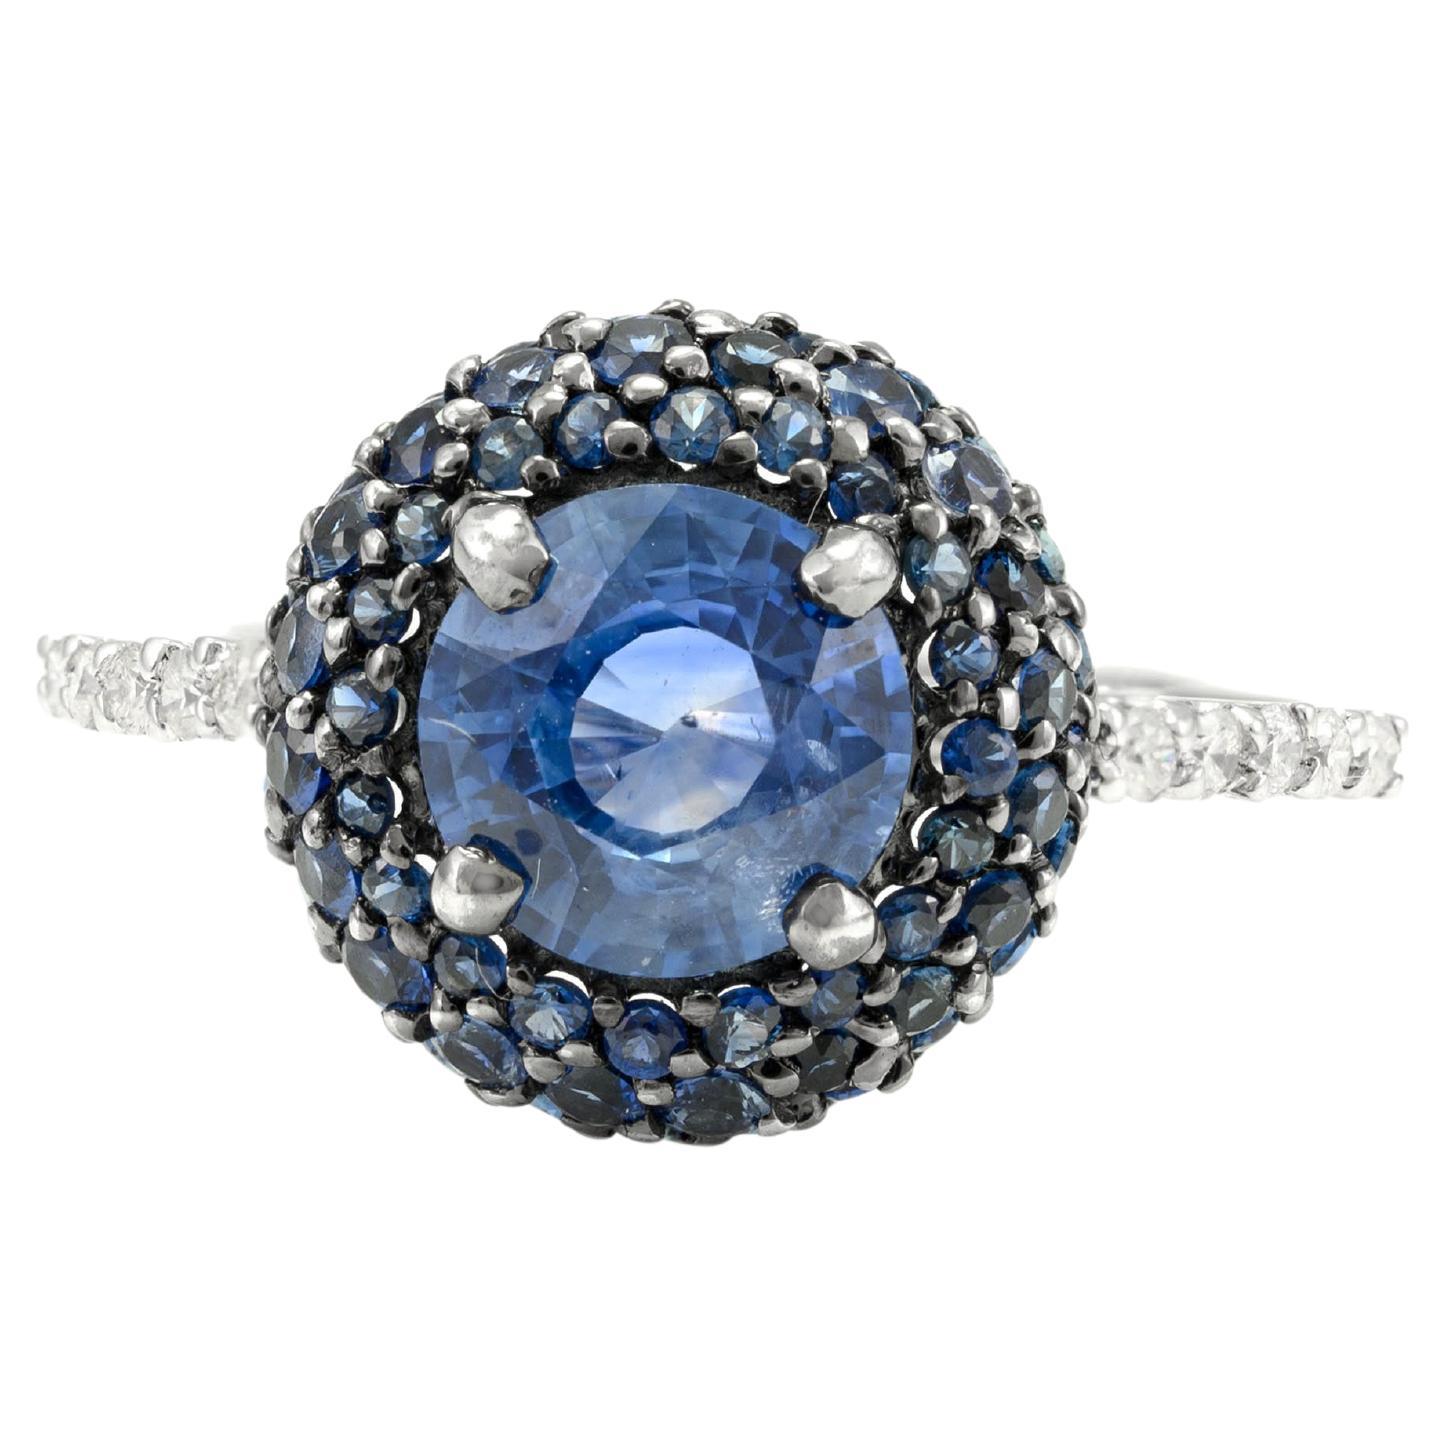 For Sale:  2.58 Ct Round Pave Blue Sapphire Ring in 18k Solid White Gold with Diamonds